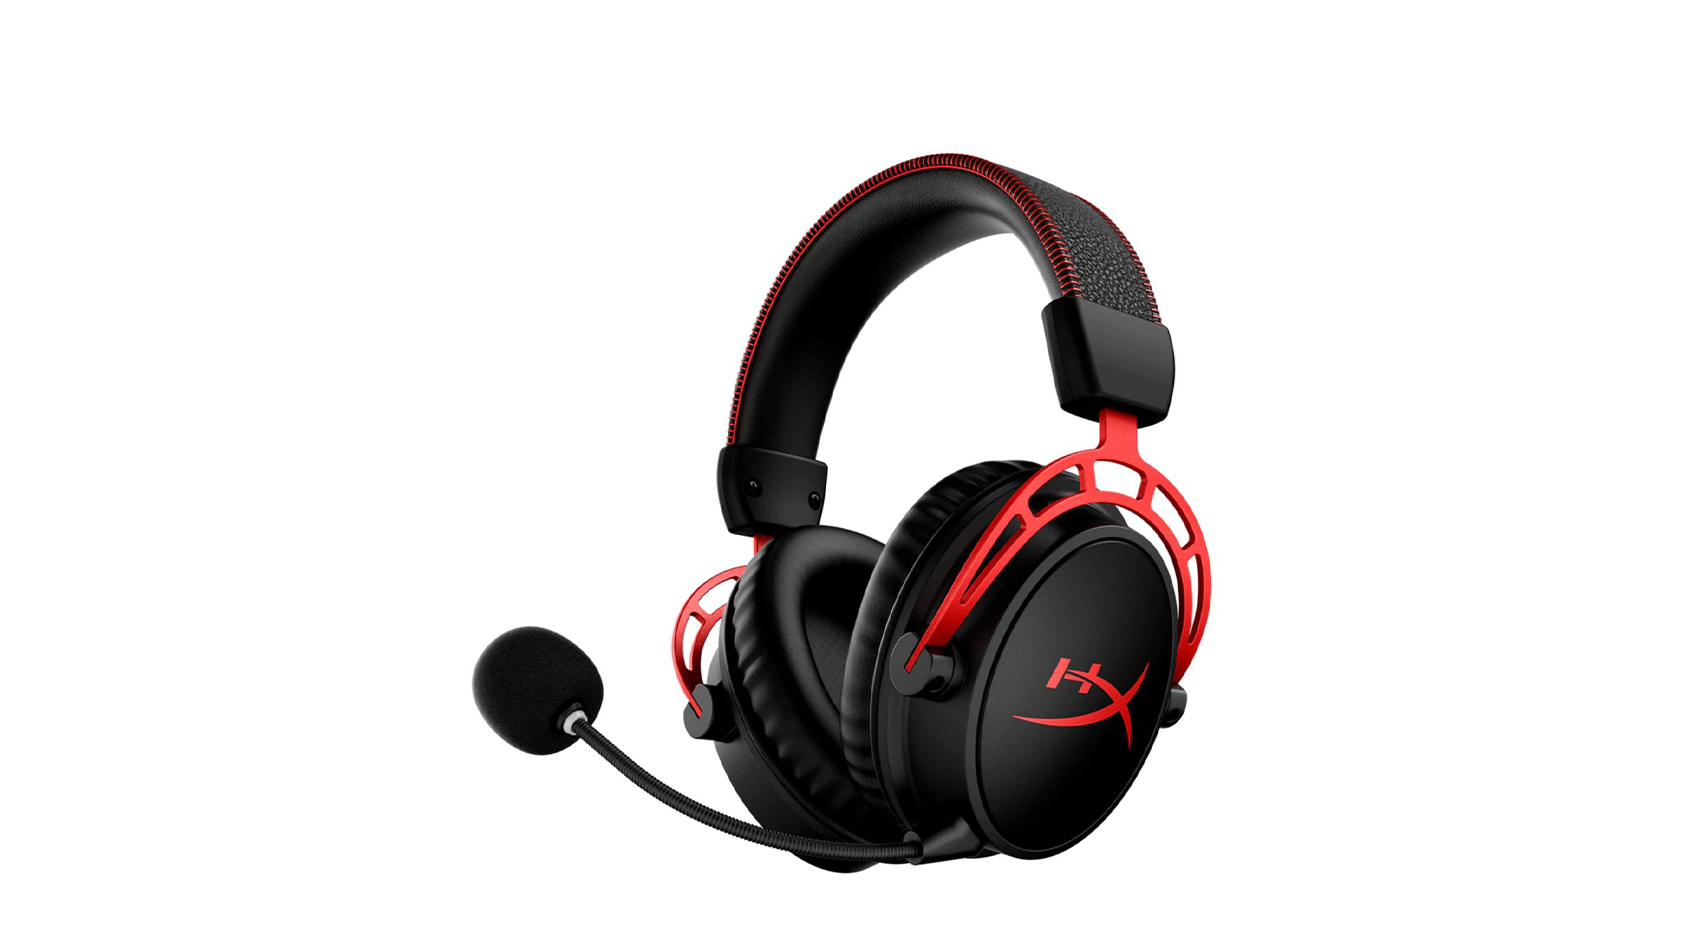 PS4 Audio Mastery: Finding The Best Headset